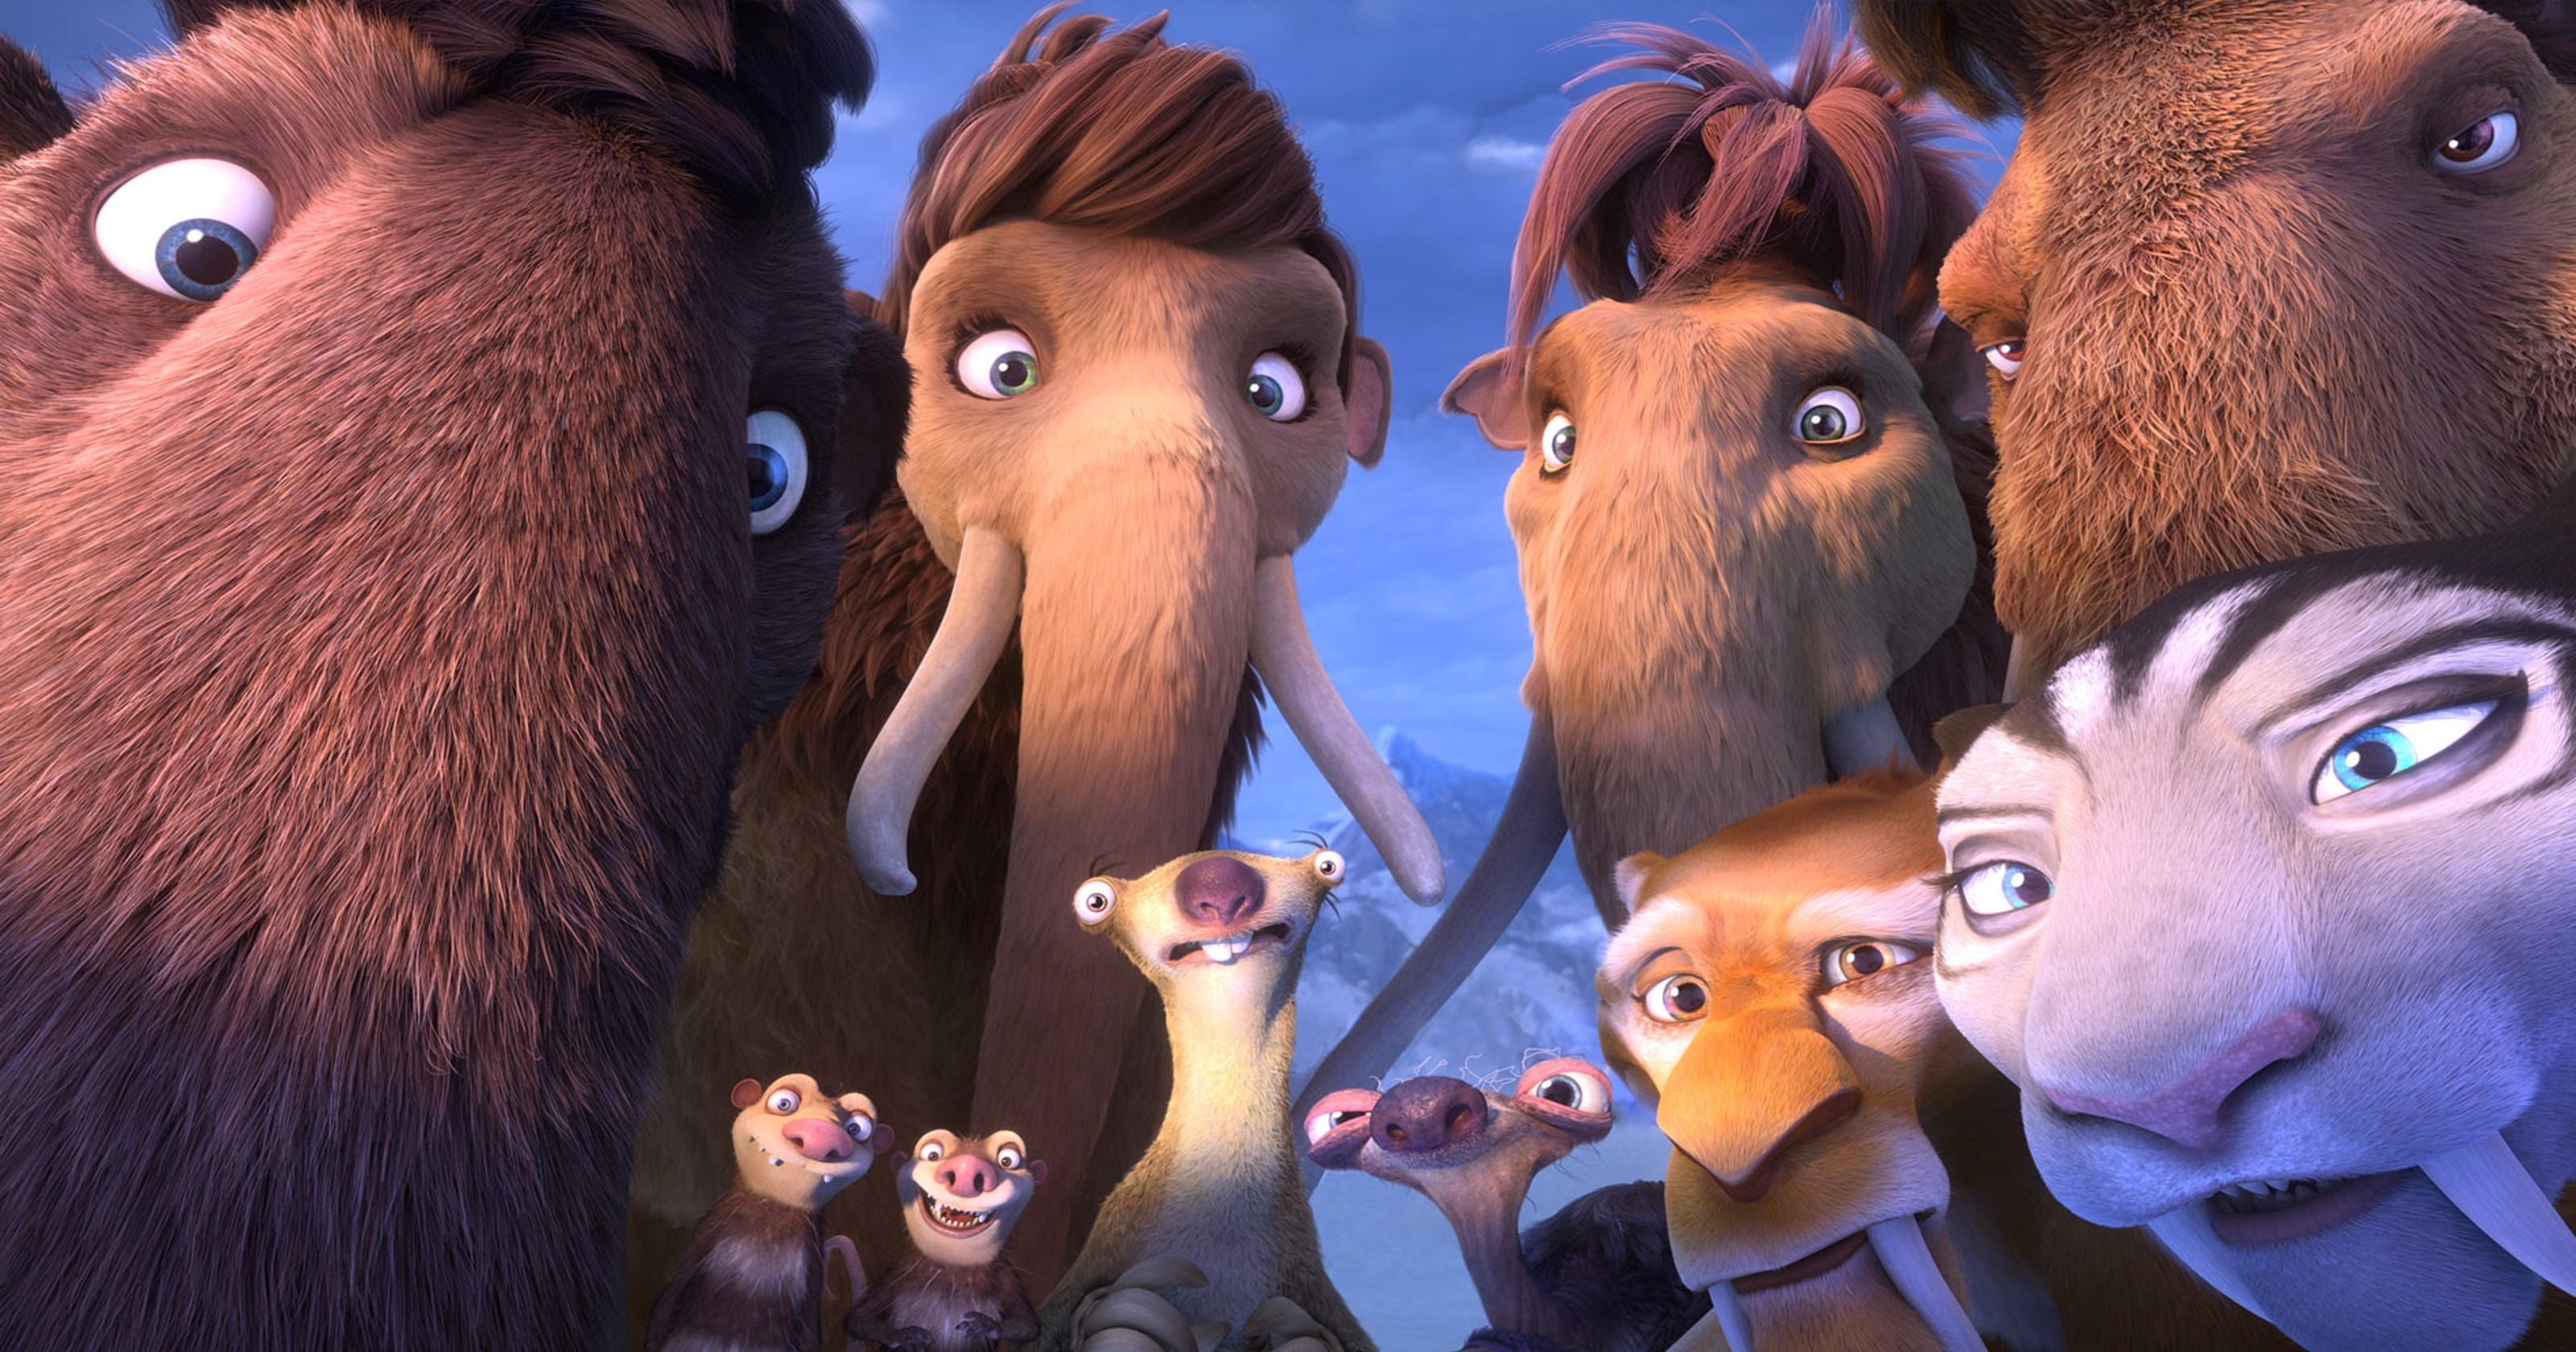 636046924528485526 Ice Age Collision Course Gallery 03 ?width=3200&height=1680&fit=crop